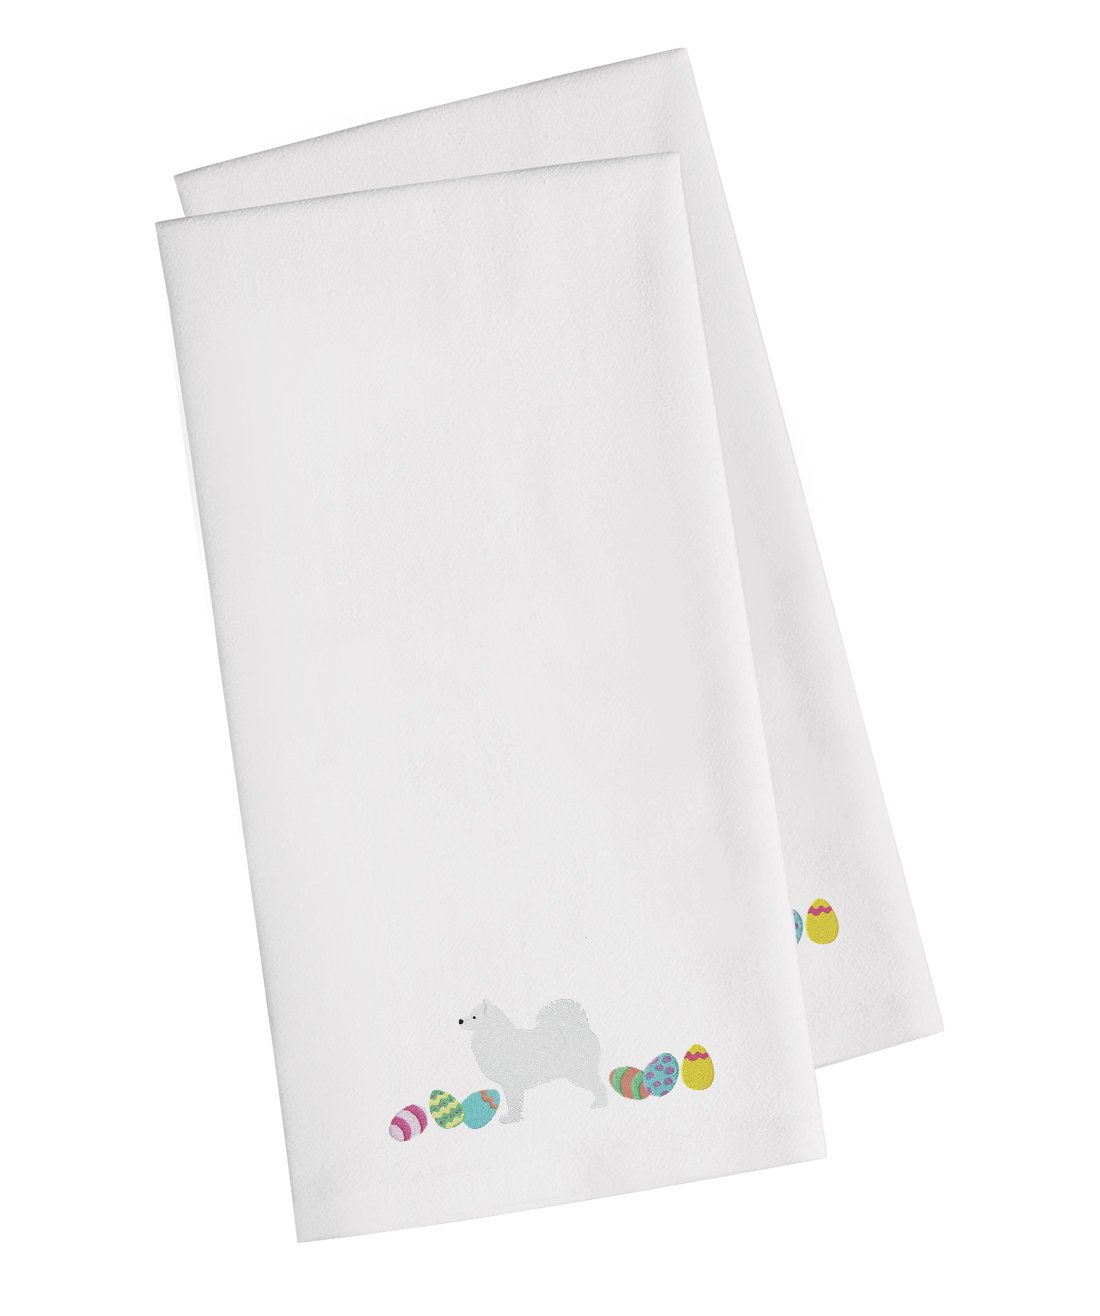 Samoyed Easter White Embroidered Kitchen Towel Set of 2 CK1681WHTWE by Caroline's Treasures